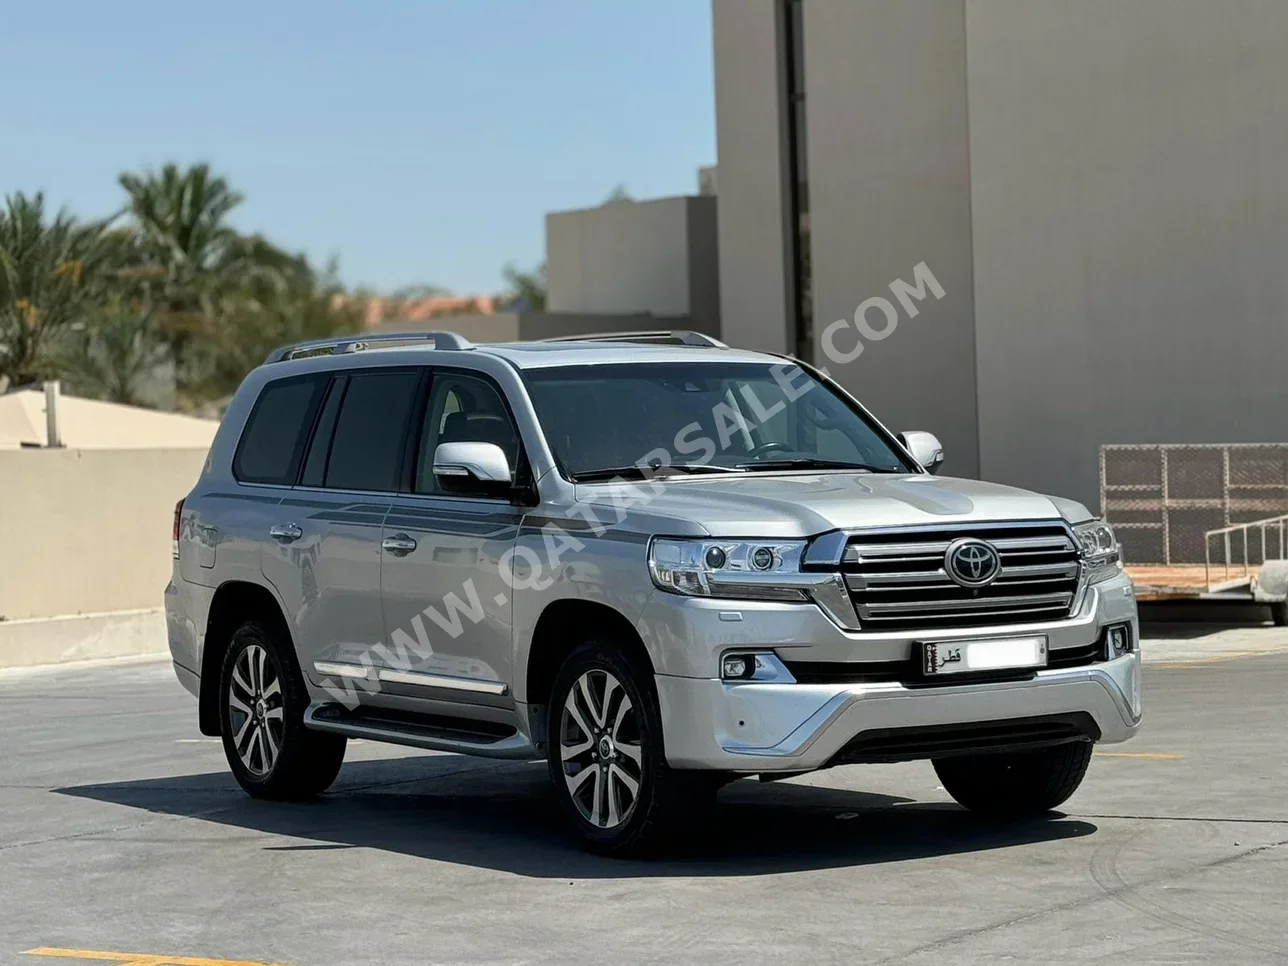 Toyota  Land Cruiser  VXS  2016  Automatic  232,000 Km  8 Cylinder  Four Wheel Drive (4WD)  SUV  Silver